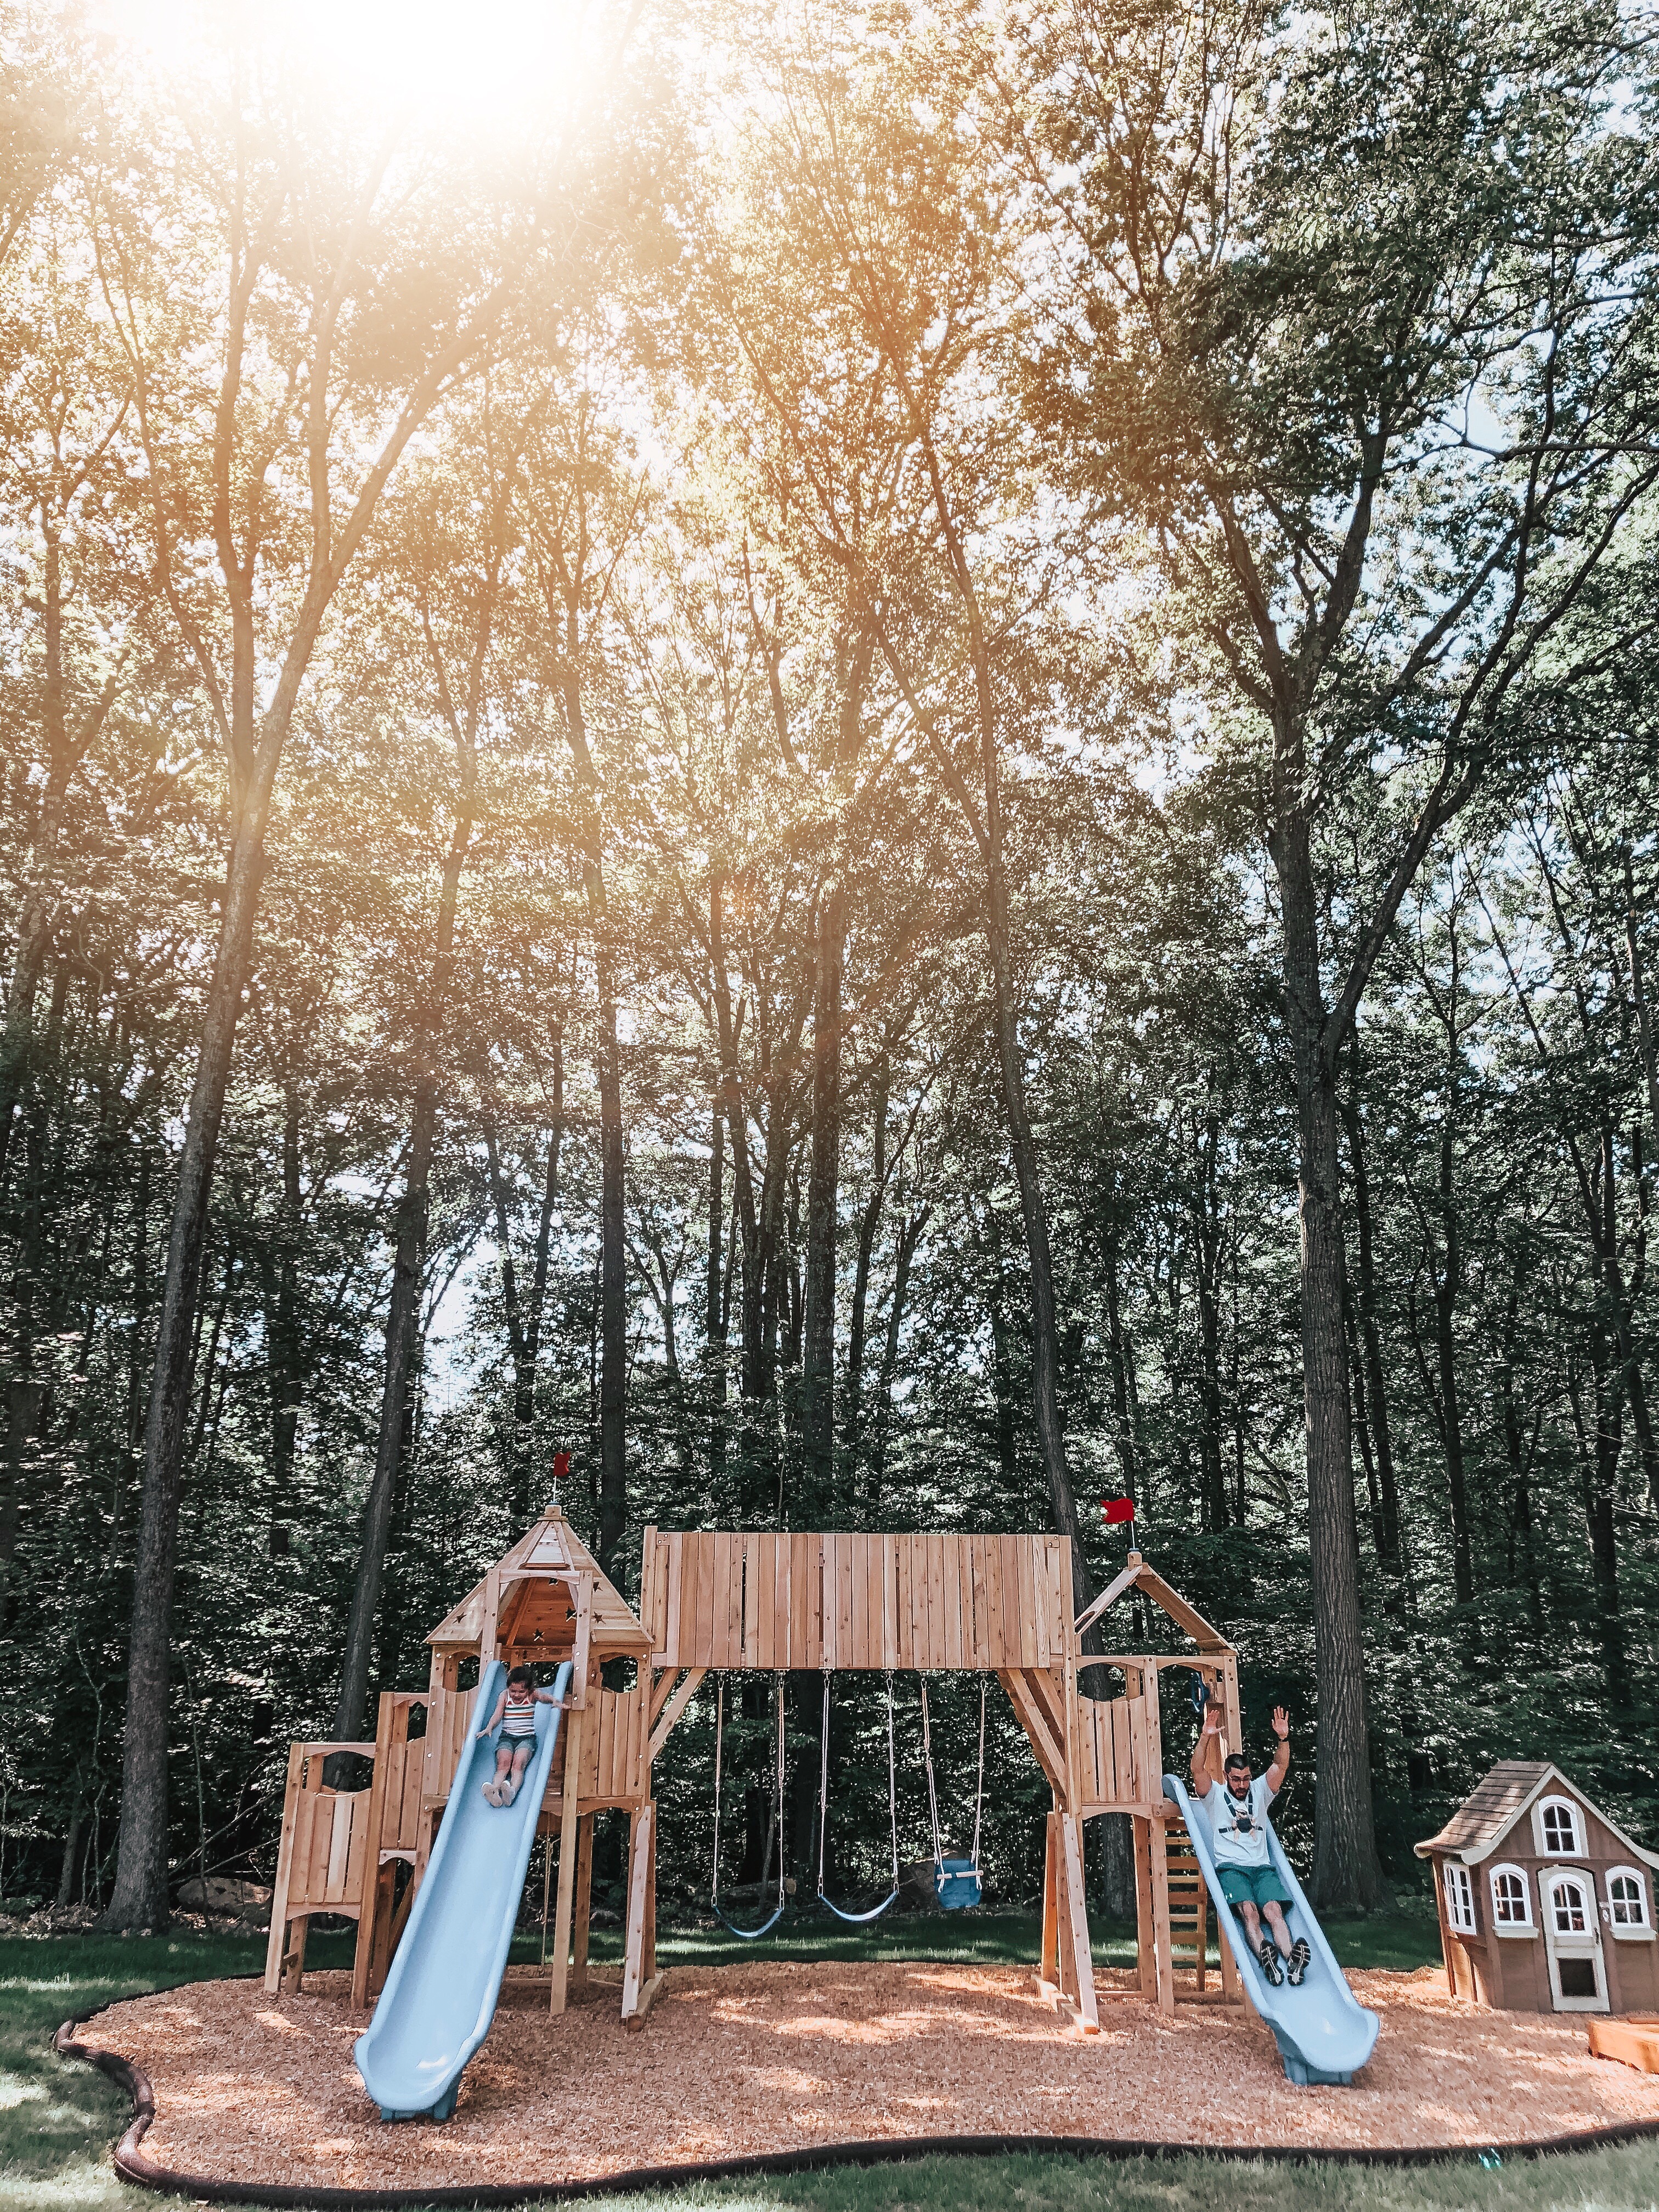 Motherhood blogger Lynzy & Co. shares her tips on choosing a swingset for your own yard and what she learned along the way